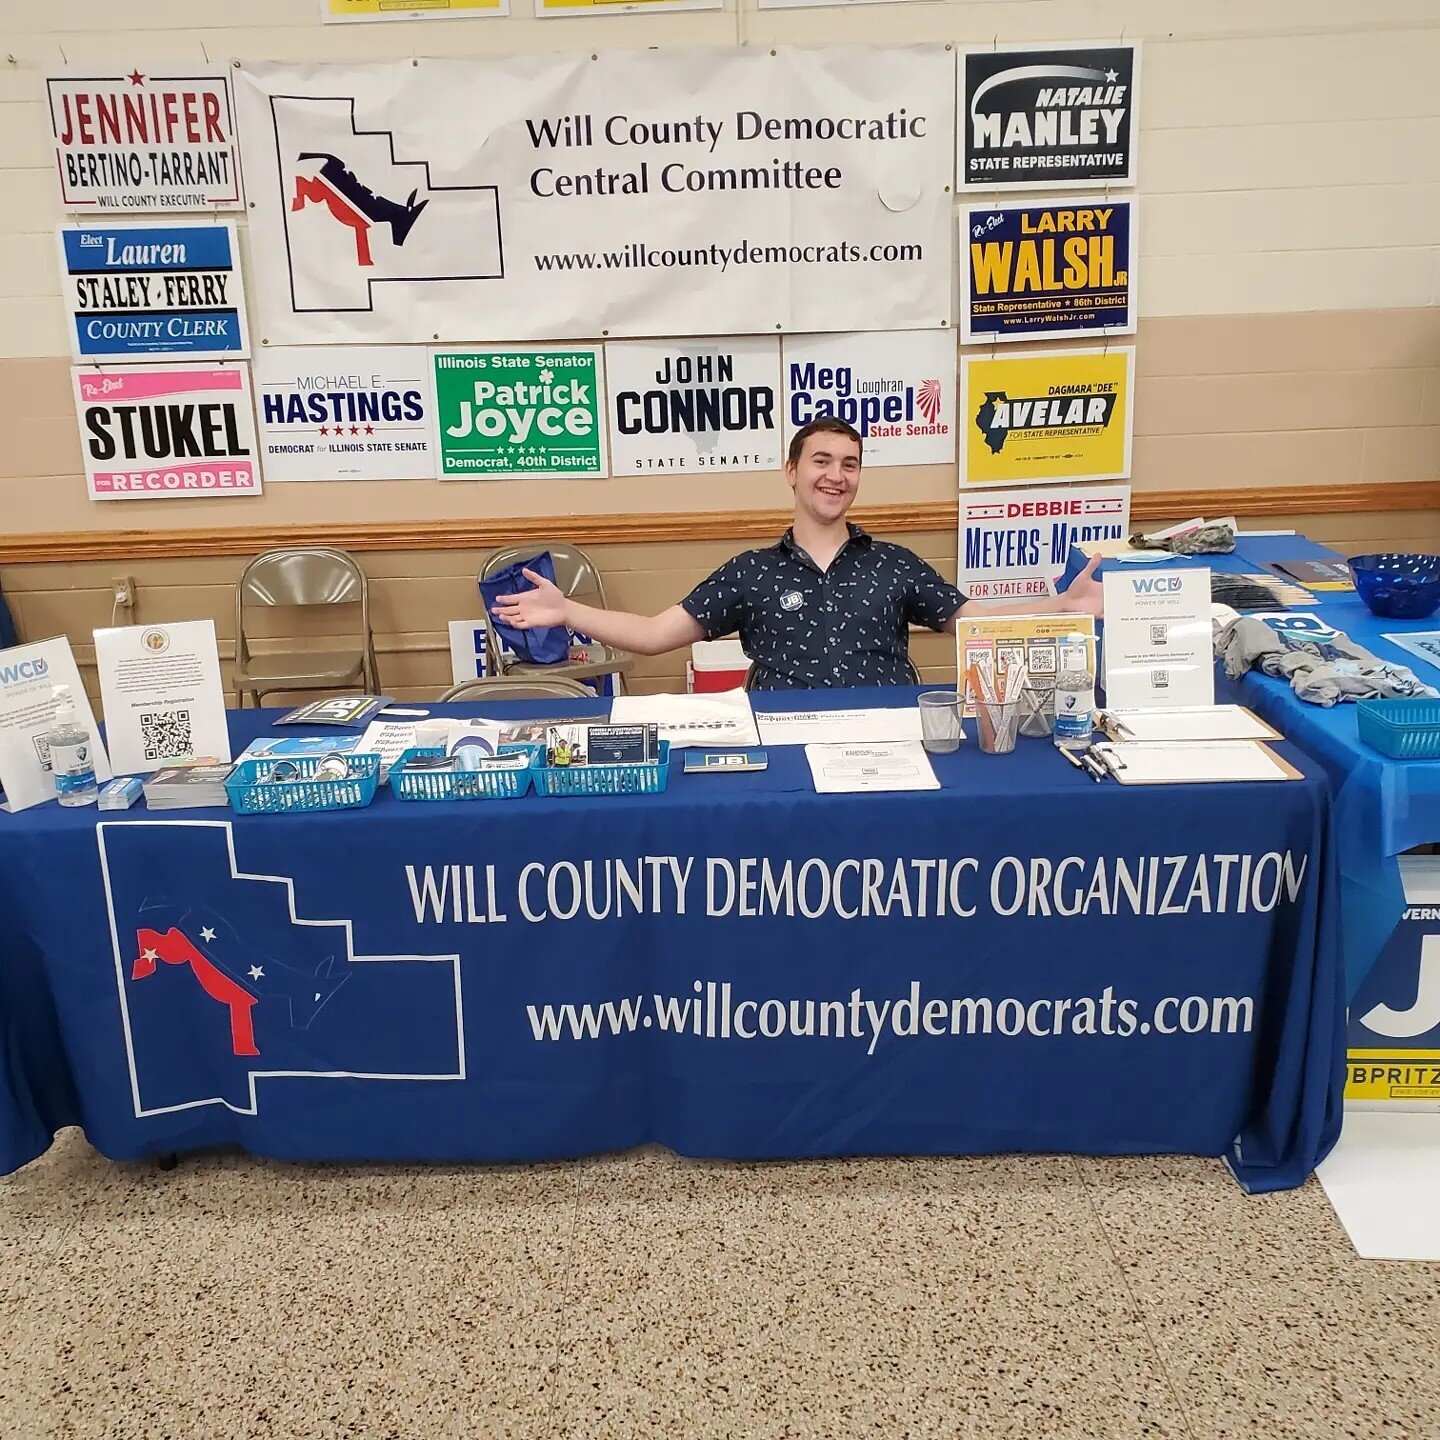 We had a fantastic time volunteering at the Democrats Table at the Will County Fair! It was so great meeting our neighbors from across the county and getting to hear what matters most to them in the 2022 Elections! S/o to Tyler Giacalone, Henry Scriv